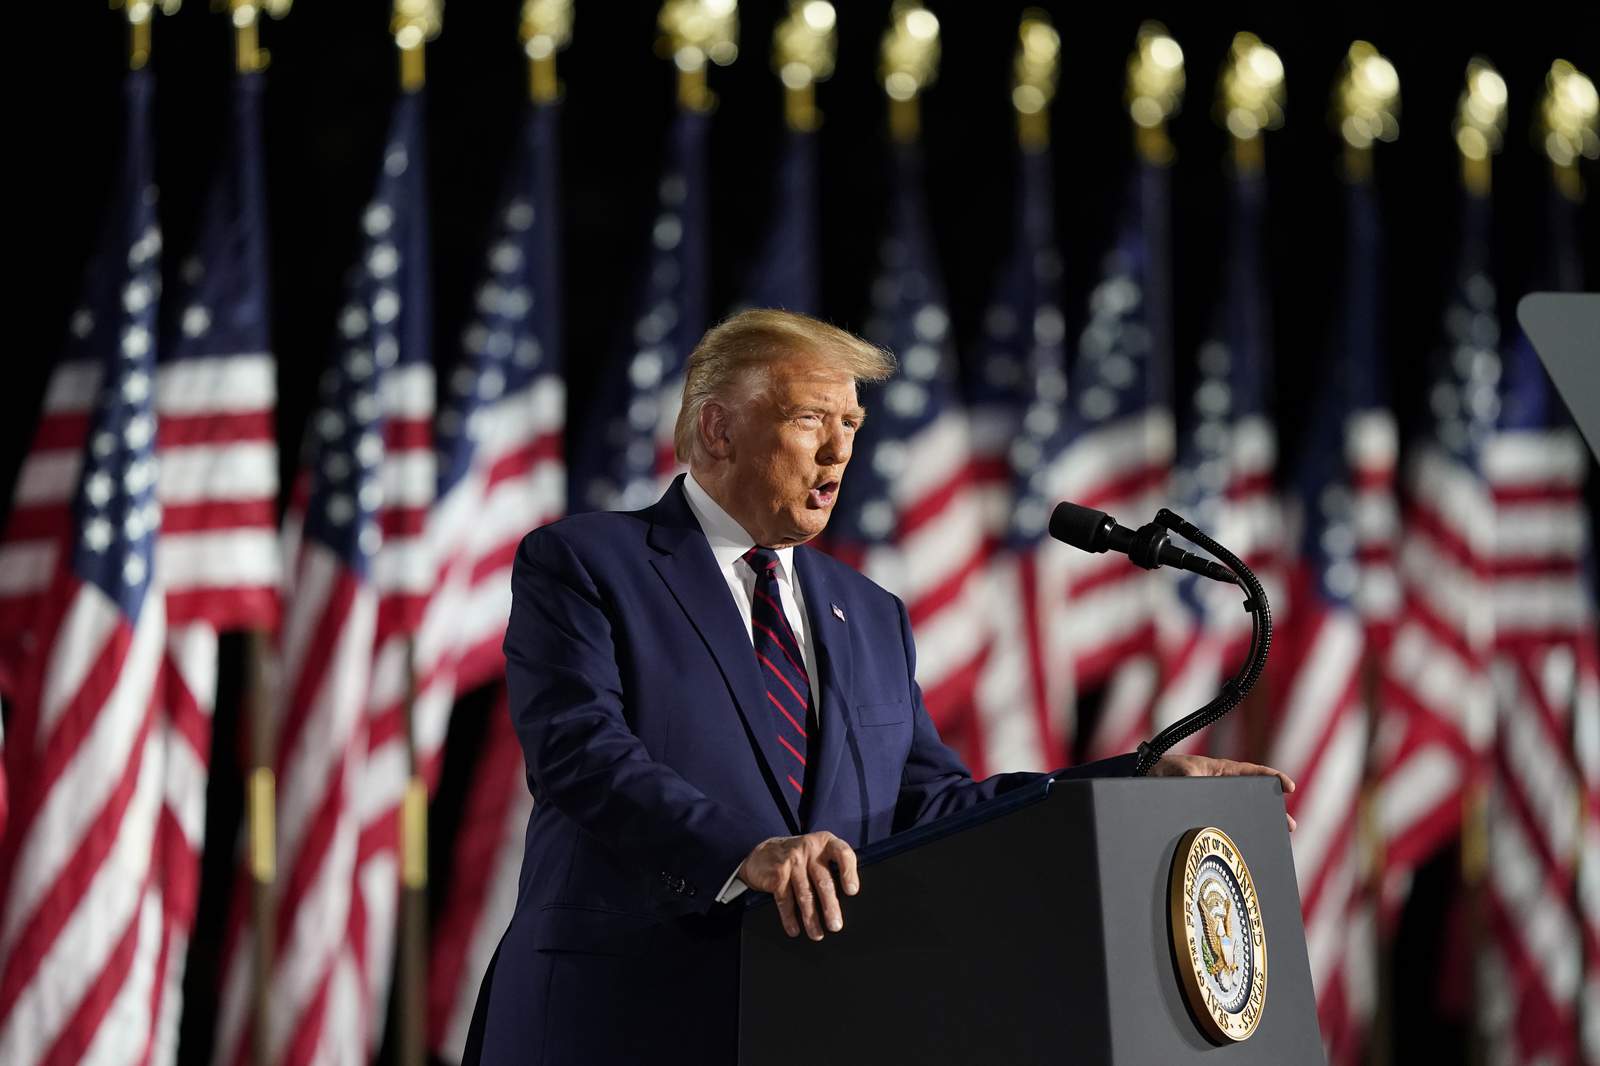 Trump lashes Biden, defies pandemic on White House stage